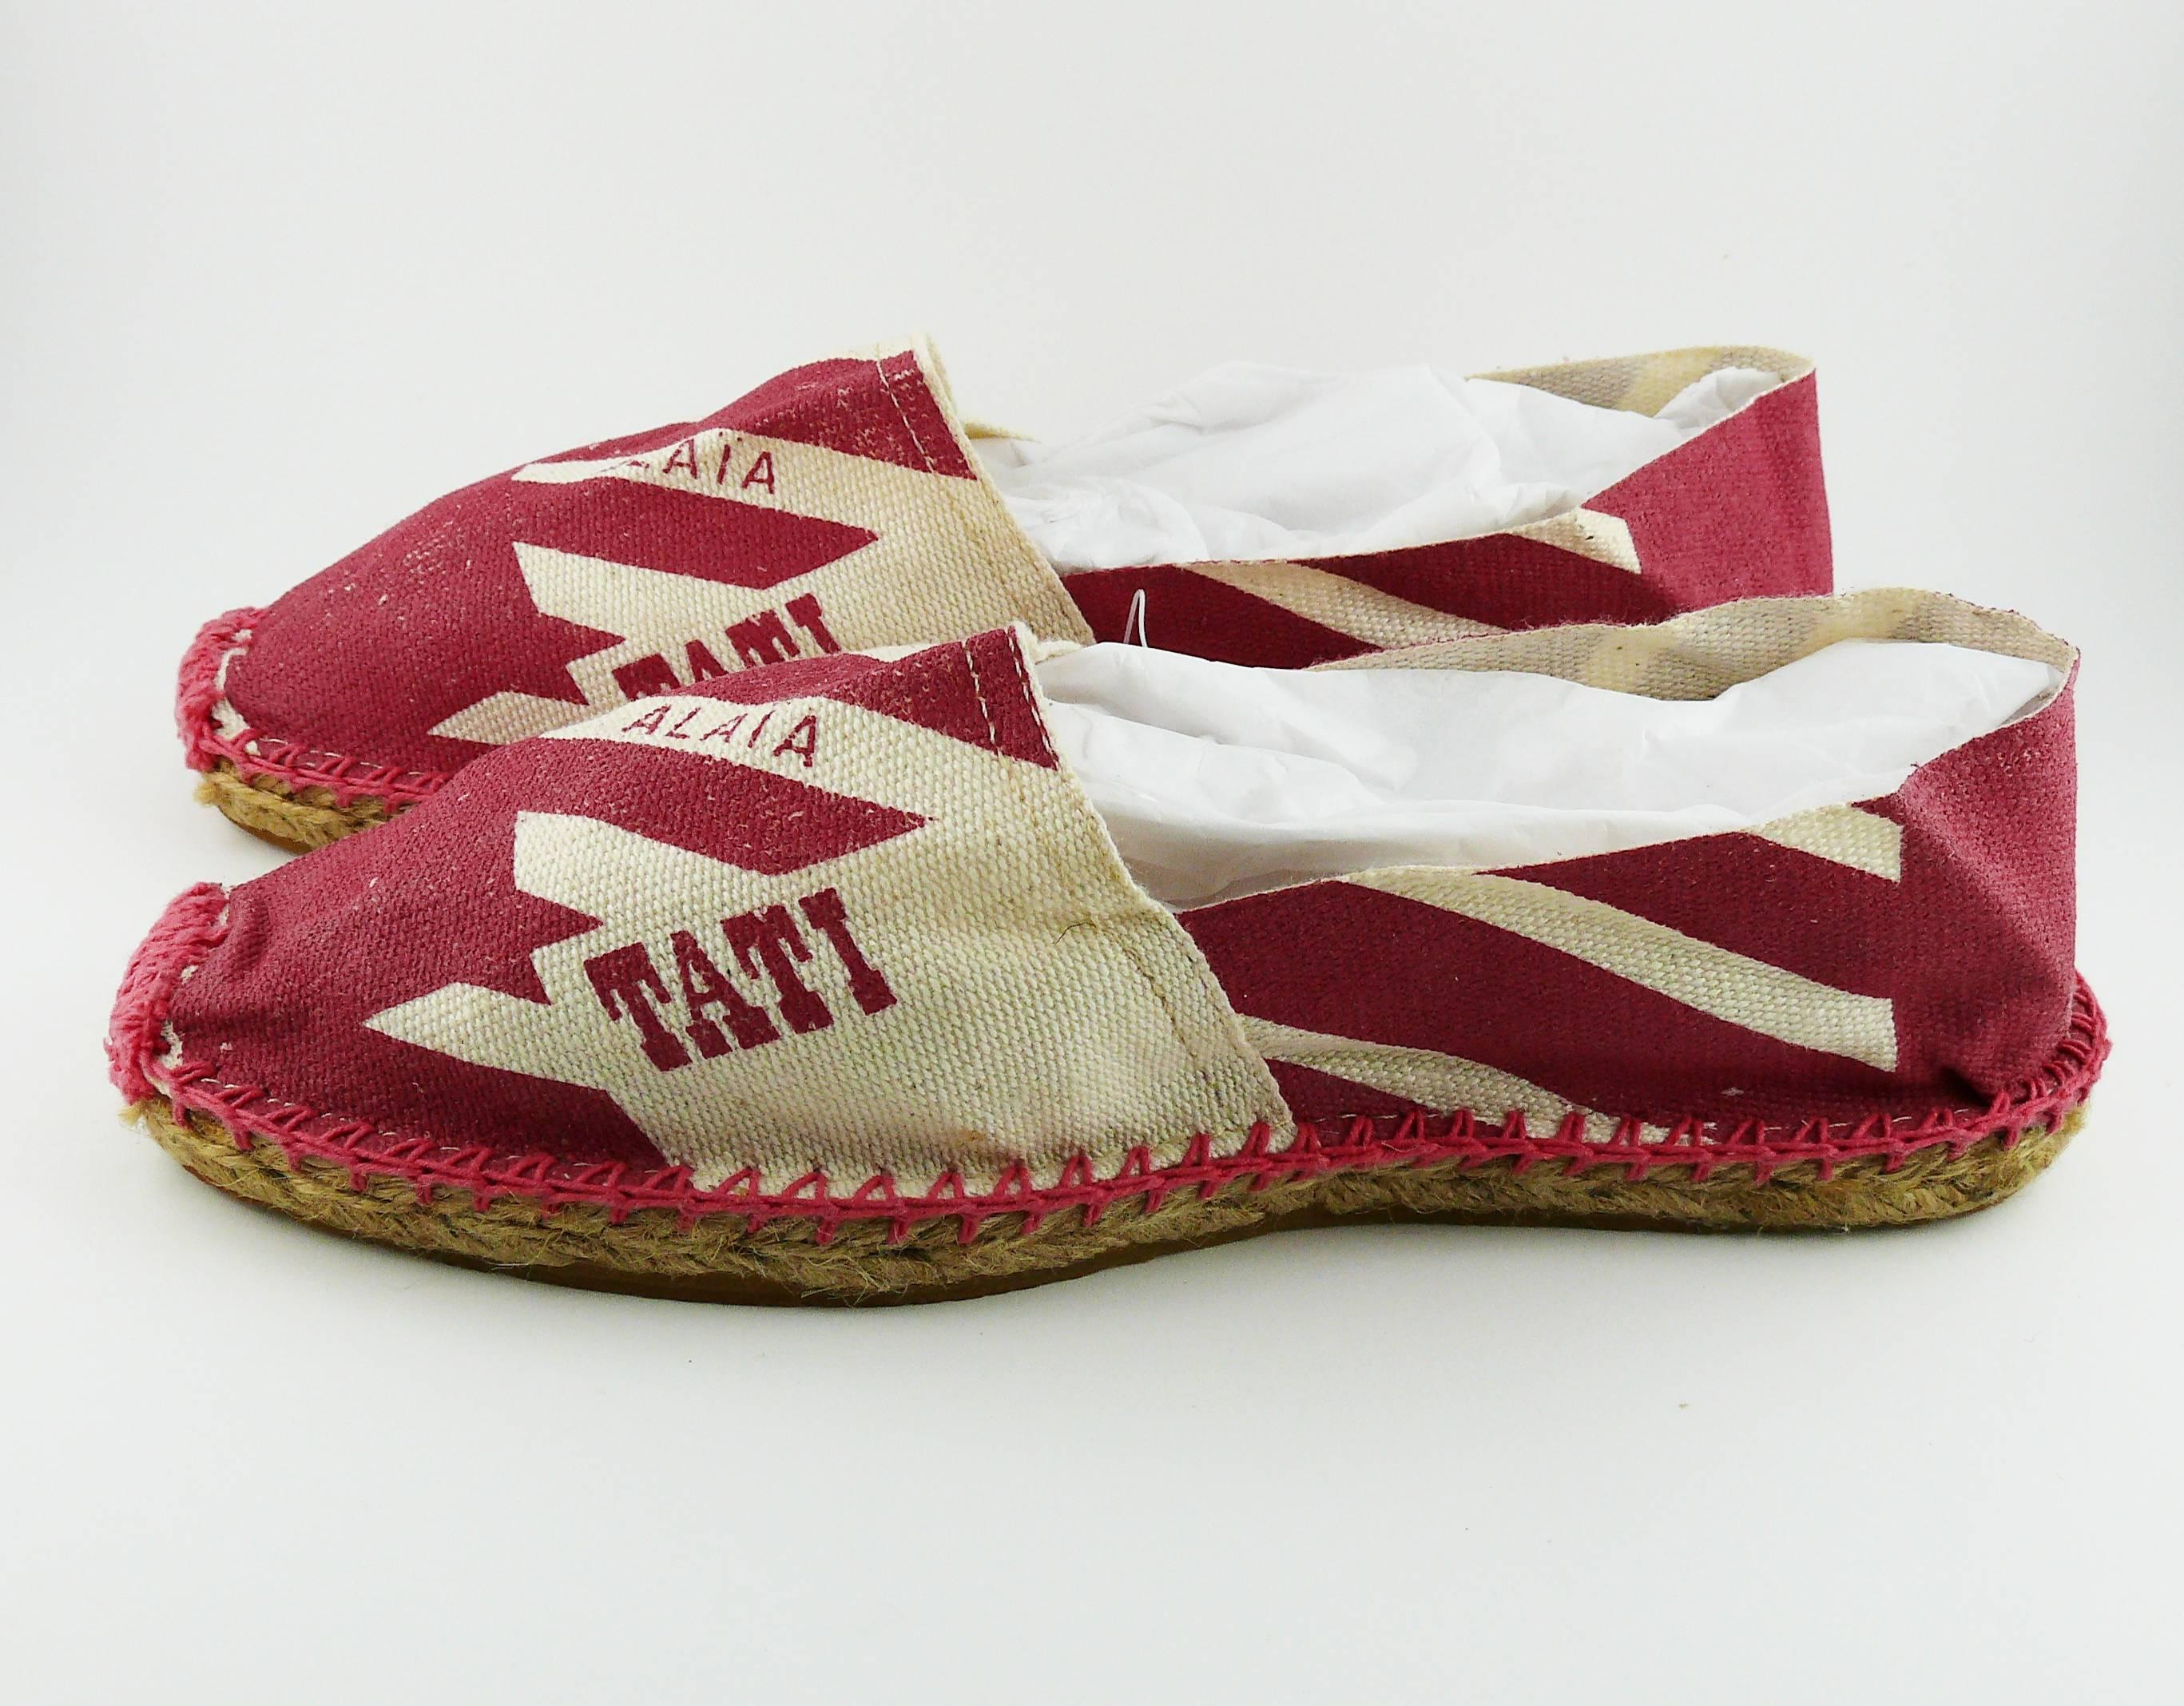 Women's Alaia Vintage Iconic Pink and Off-white Canvas Espadrilles Rare Size 37 (FR)